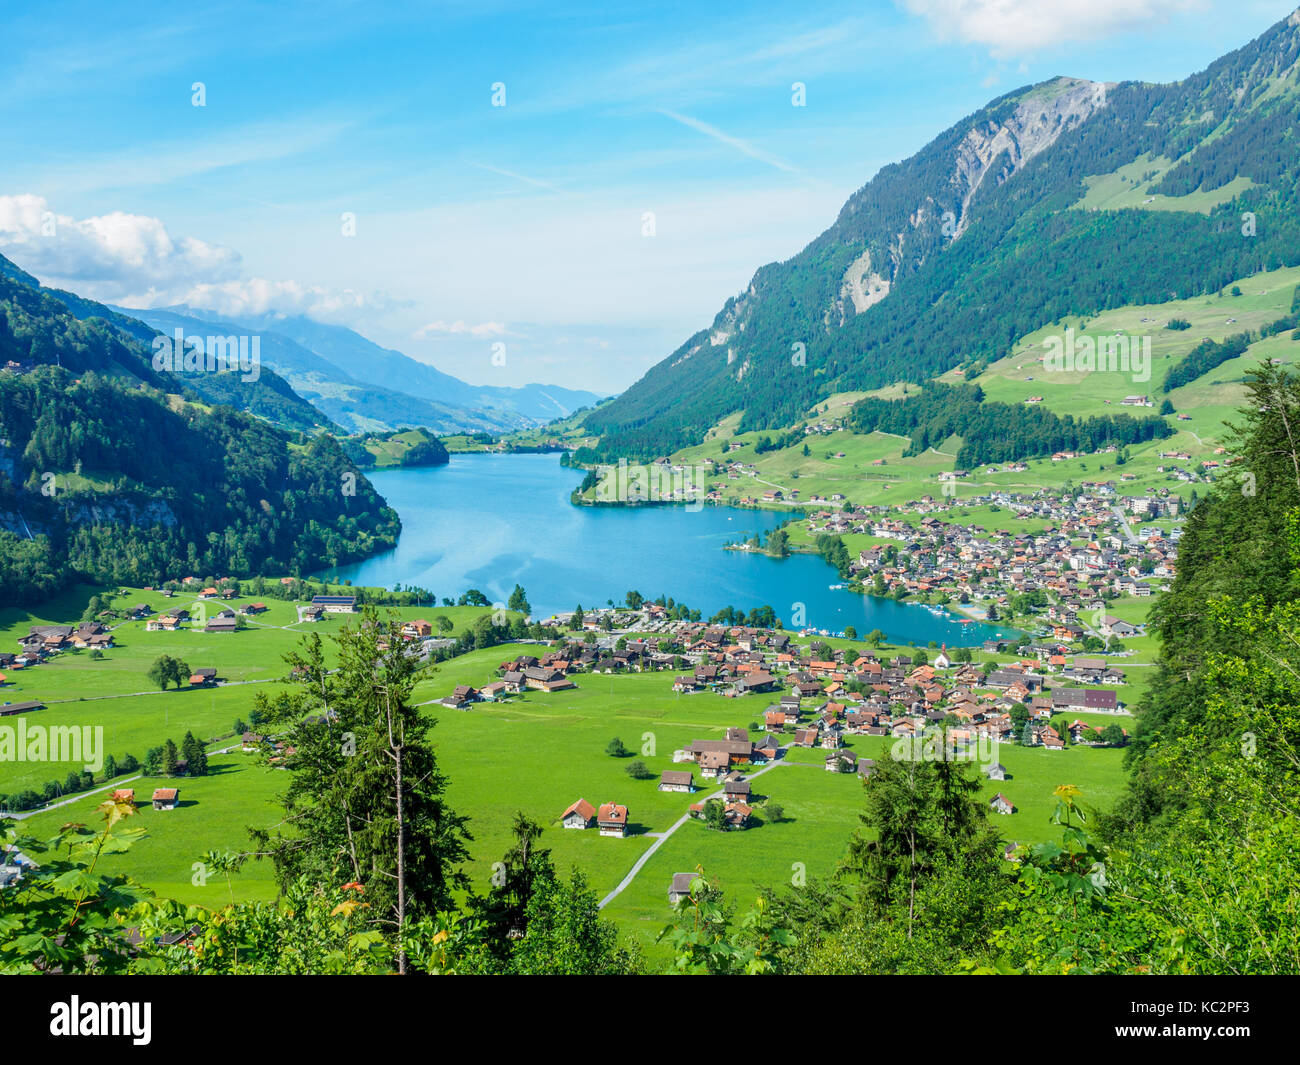 High view point lake Lungern and village from Brunig Pass, Switzerland. Stock Photo